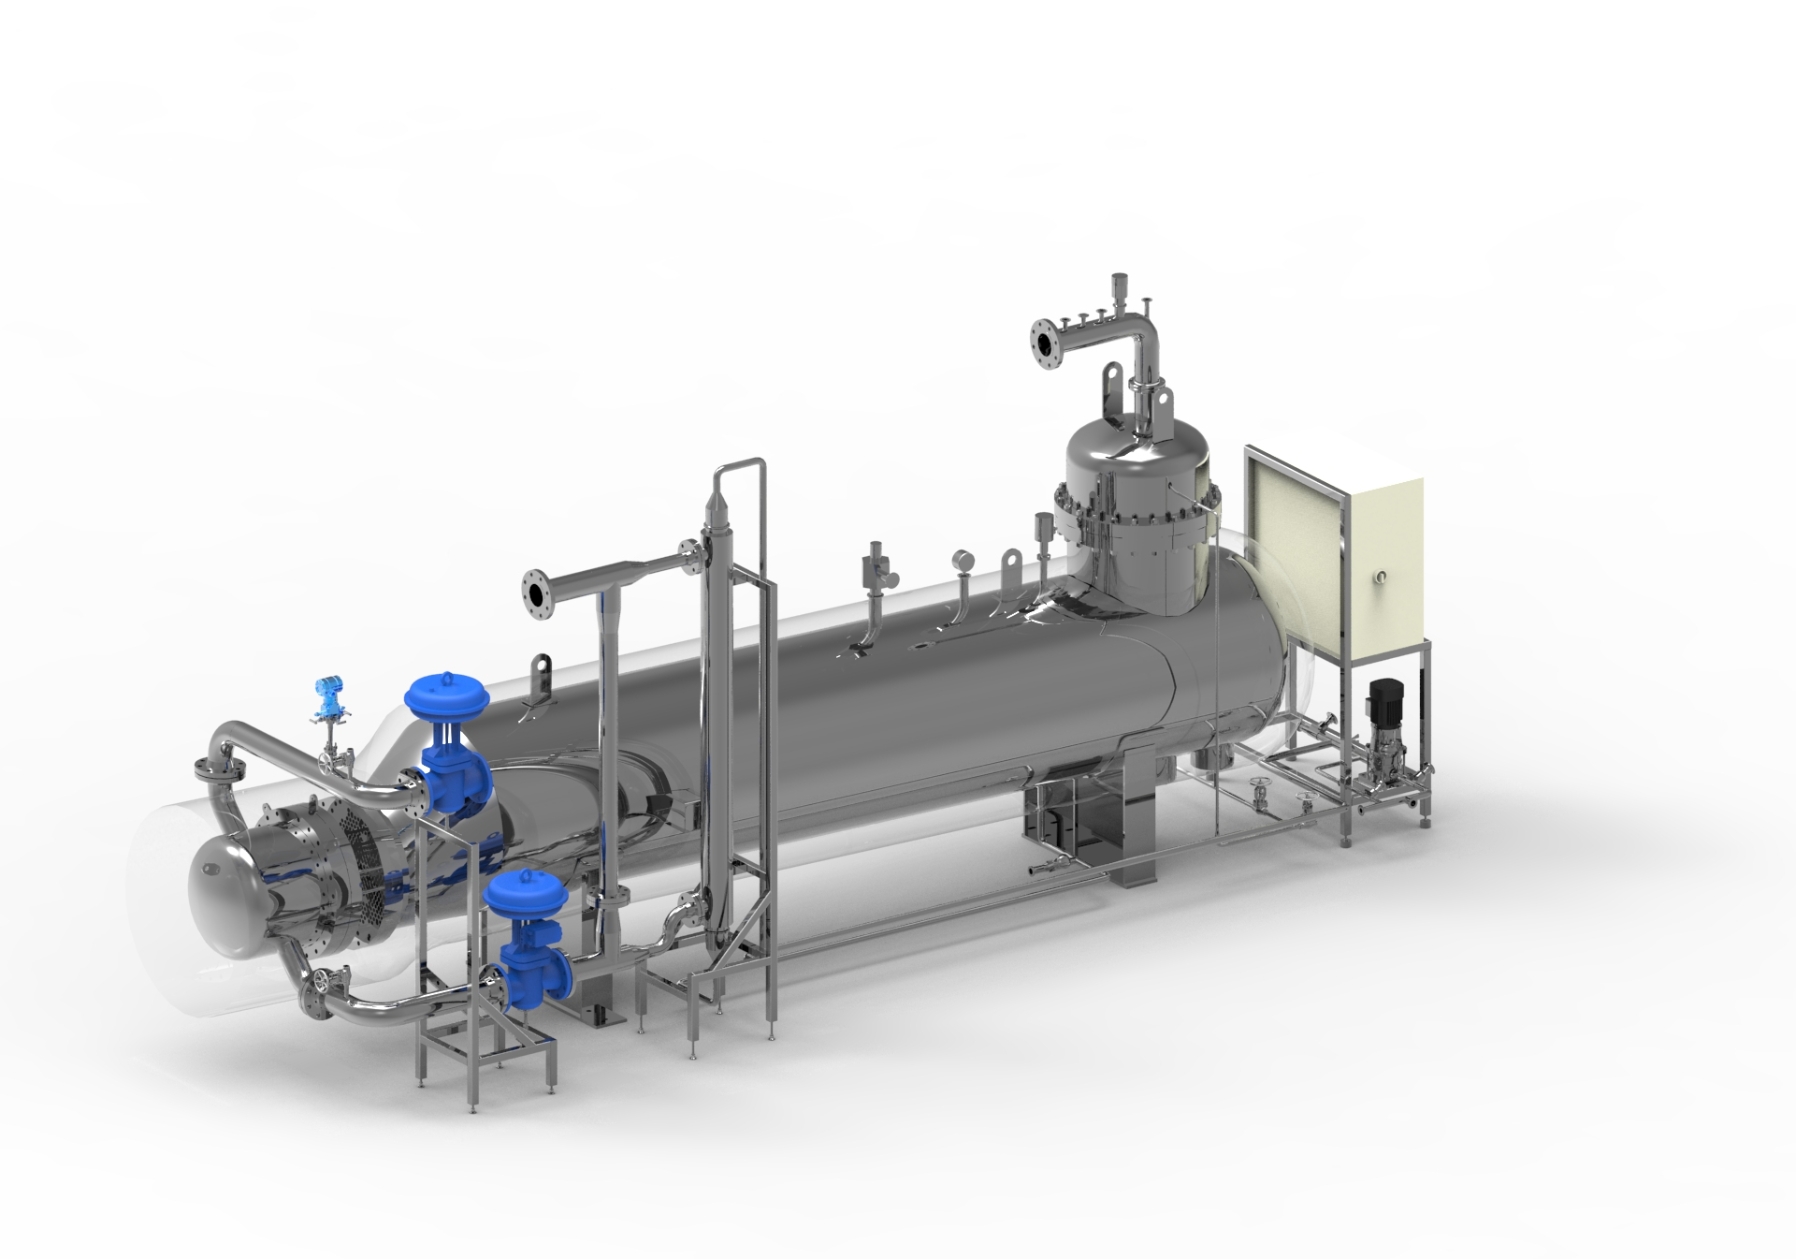 3D rendering of an industrial continuous liner drum or bag filling station, featuring a large horizontal cylindrical vessel with stainless steel piping, blue manual and automatic valves, and a control panel. This equipment is designed for sterile filling operations, with a focus on maintaining sanitary conditions and ensuring efficient and precise processing in an industrial environment.